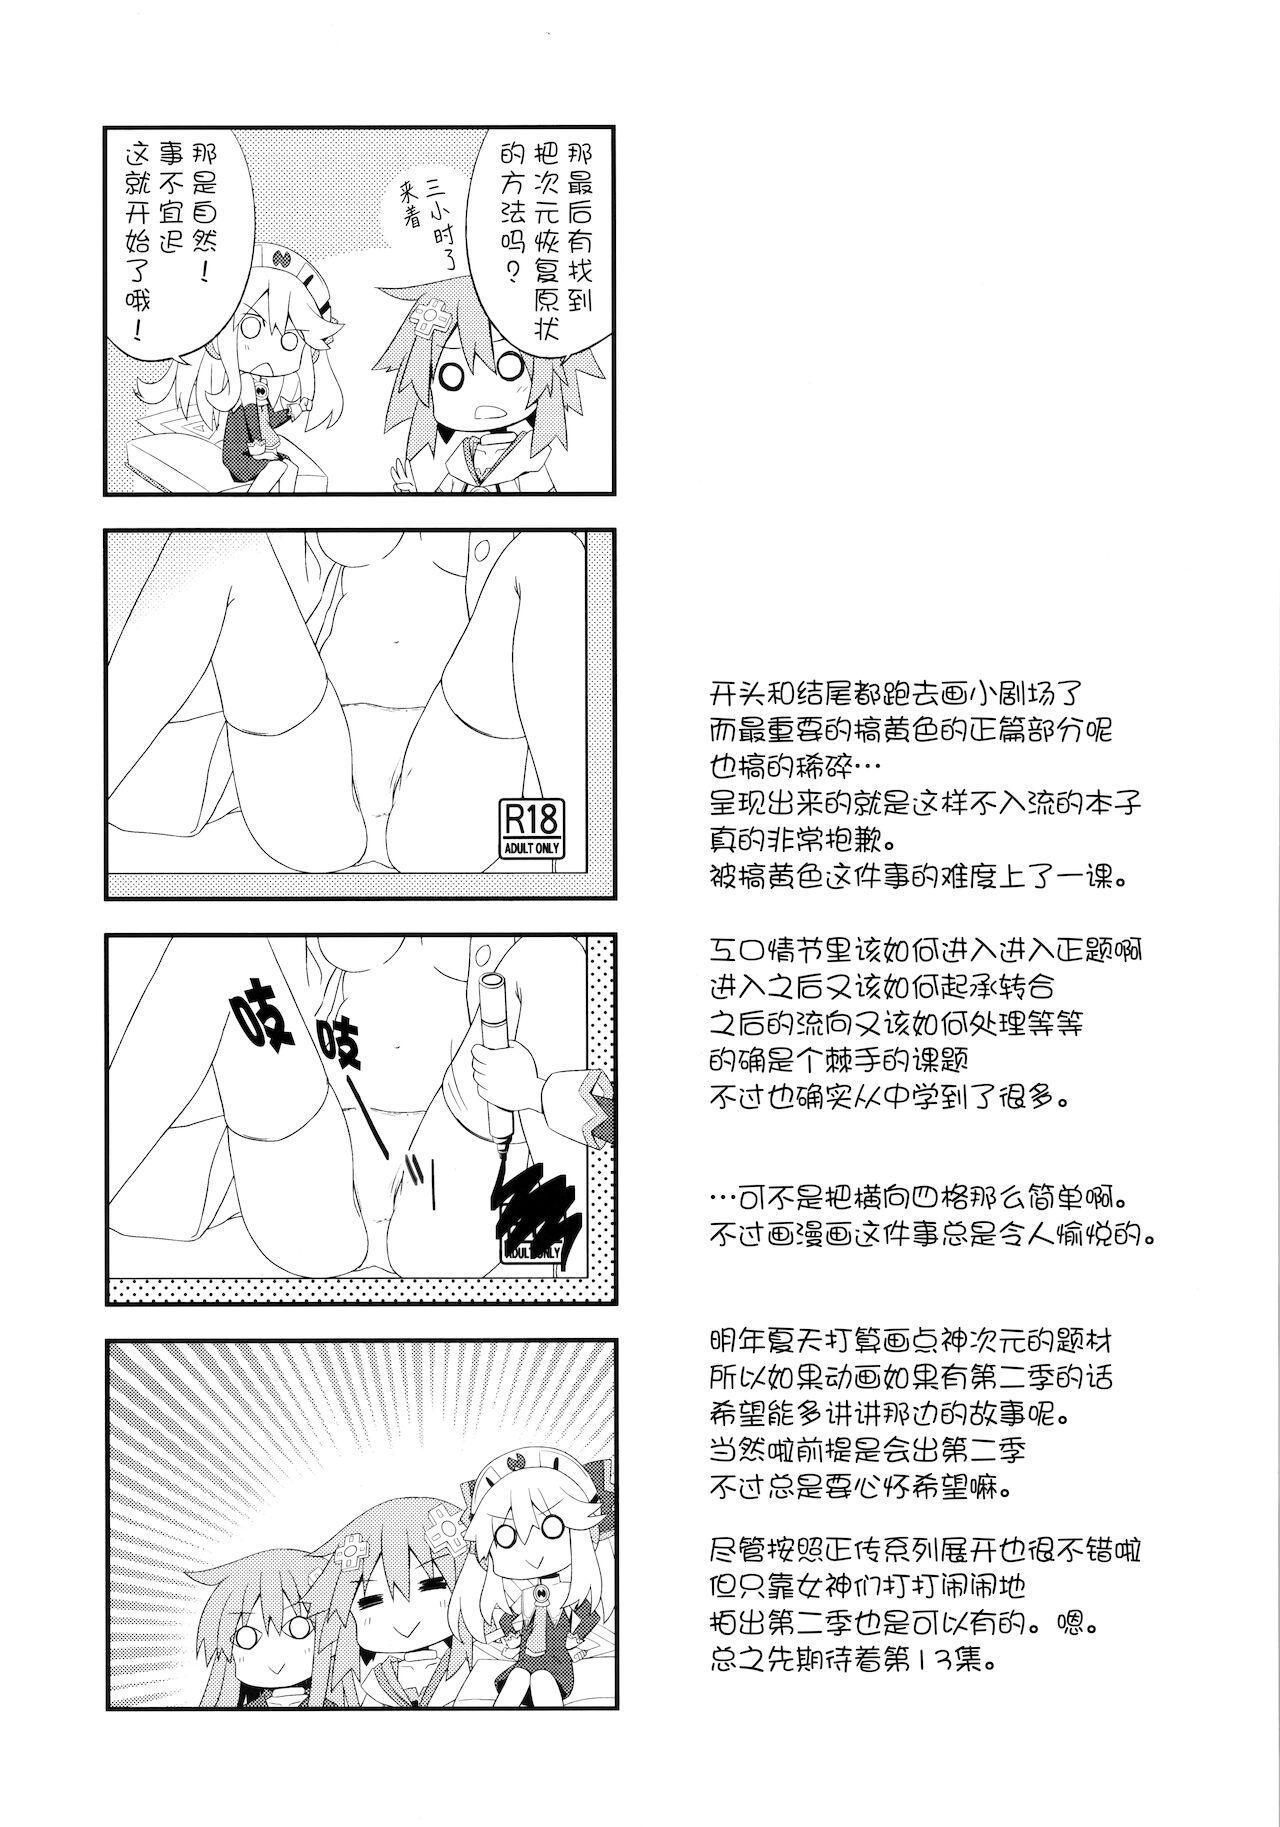 A certain Nepgear was harmed in the making of this doujinshi 15